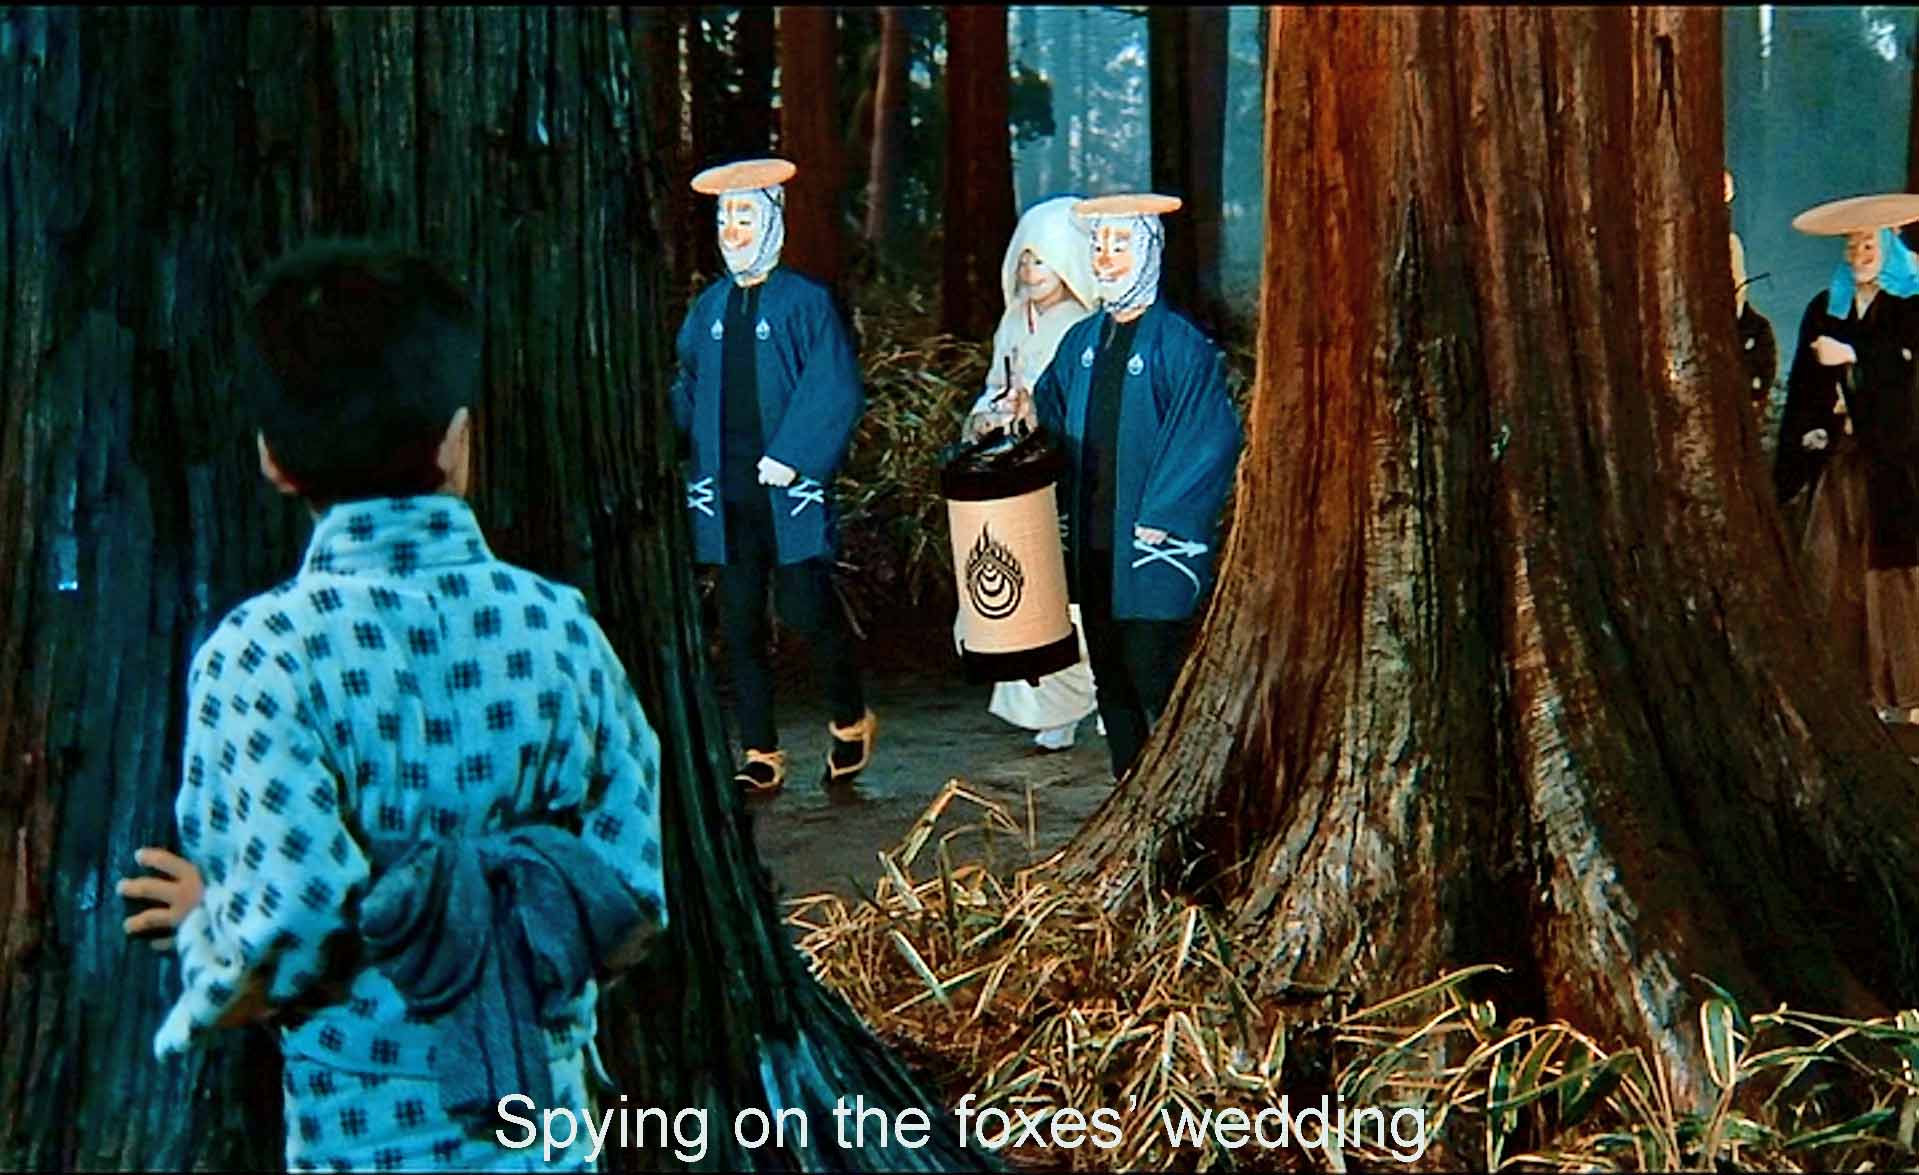 Spying on the foxes' wedding